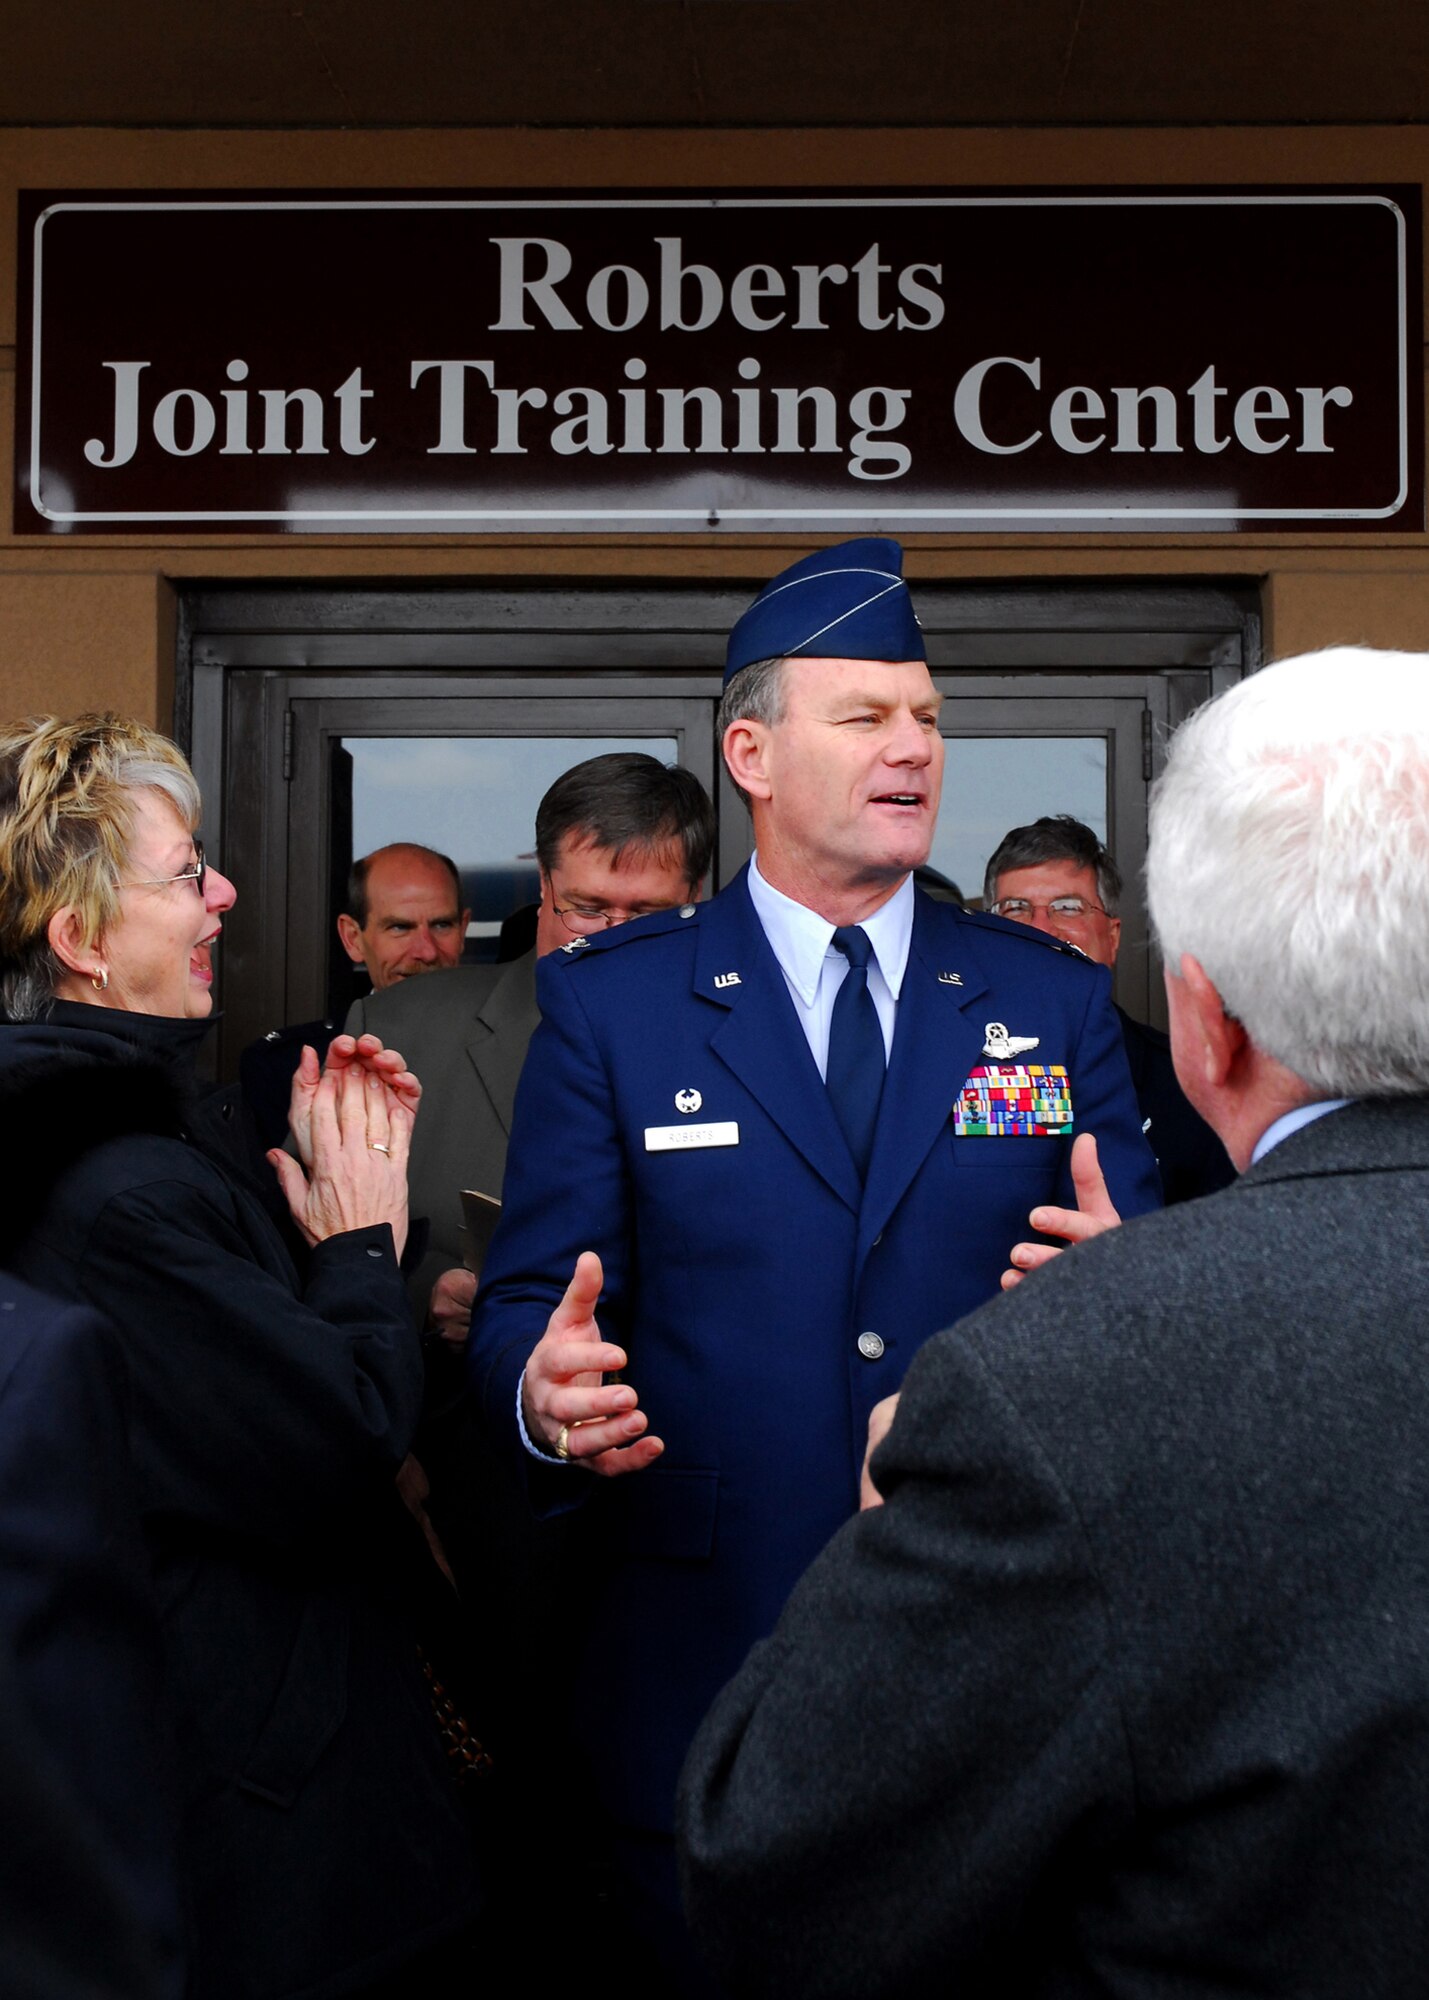 Colonel James B. Roberts addresses wellwishers after being surprised with the naming and dedication of the Roberts Joint Training Center at the Niagara Falls Air Reserve Station. (U.S. Air Force photo/Tech. Sgt. Karl C. Vester)